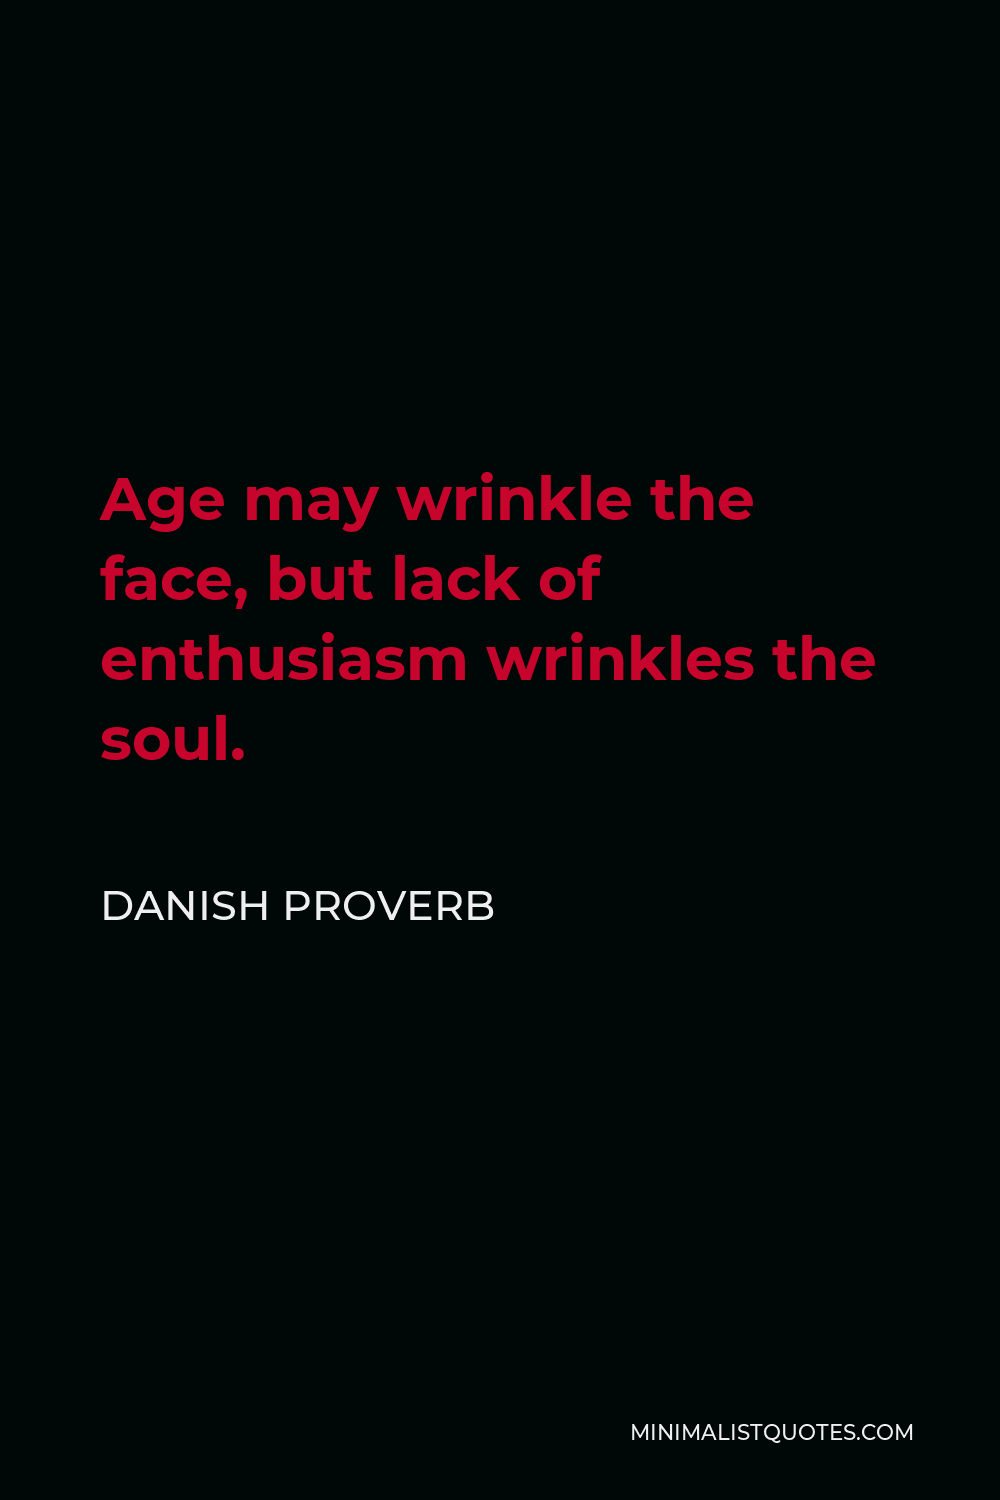 Danish Proverb Quote - Age may wrinkle the face, but lack of enthusiasm wrinkles the soul.